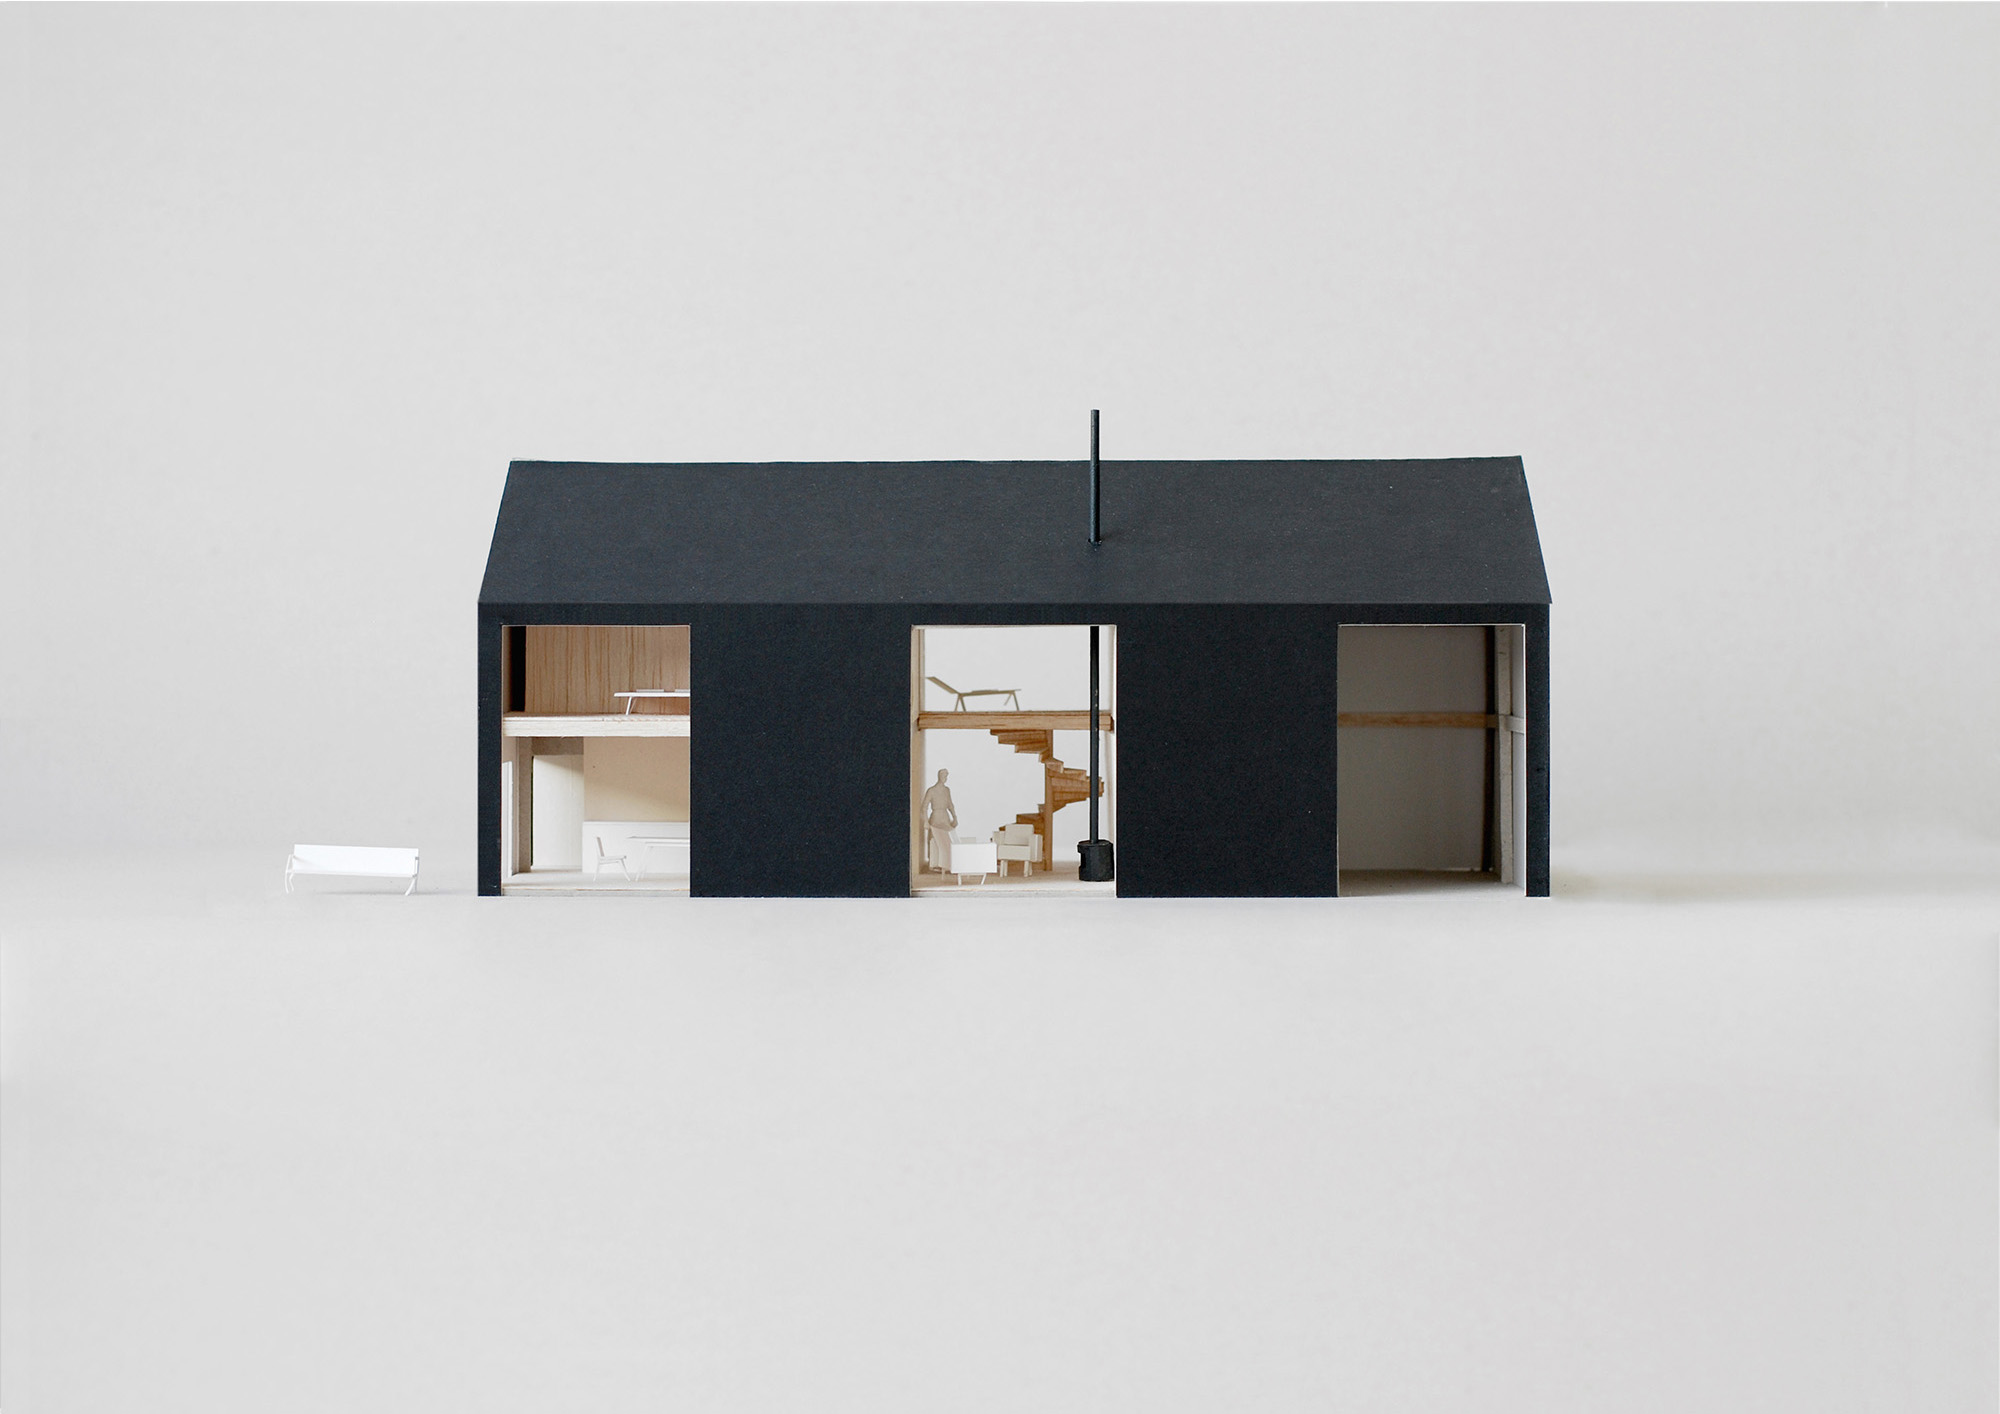 Erbar Mattes Architects Barn to guest house conversion Kent